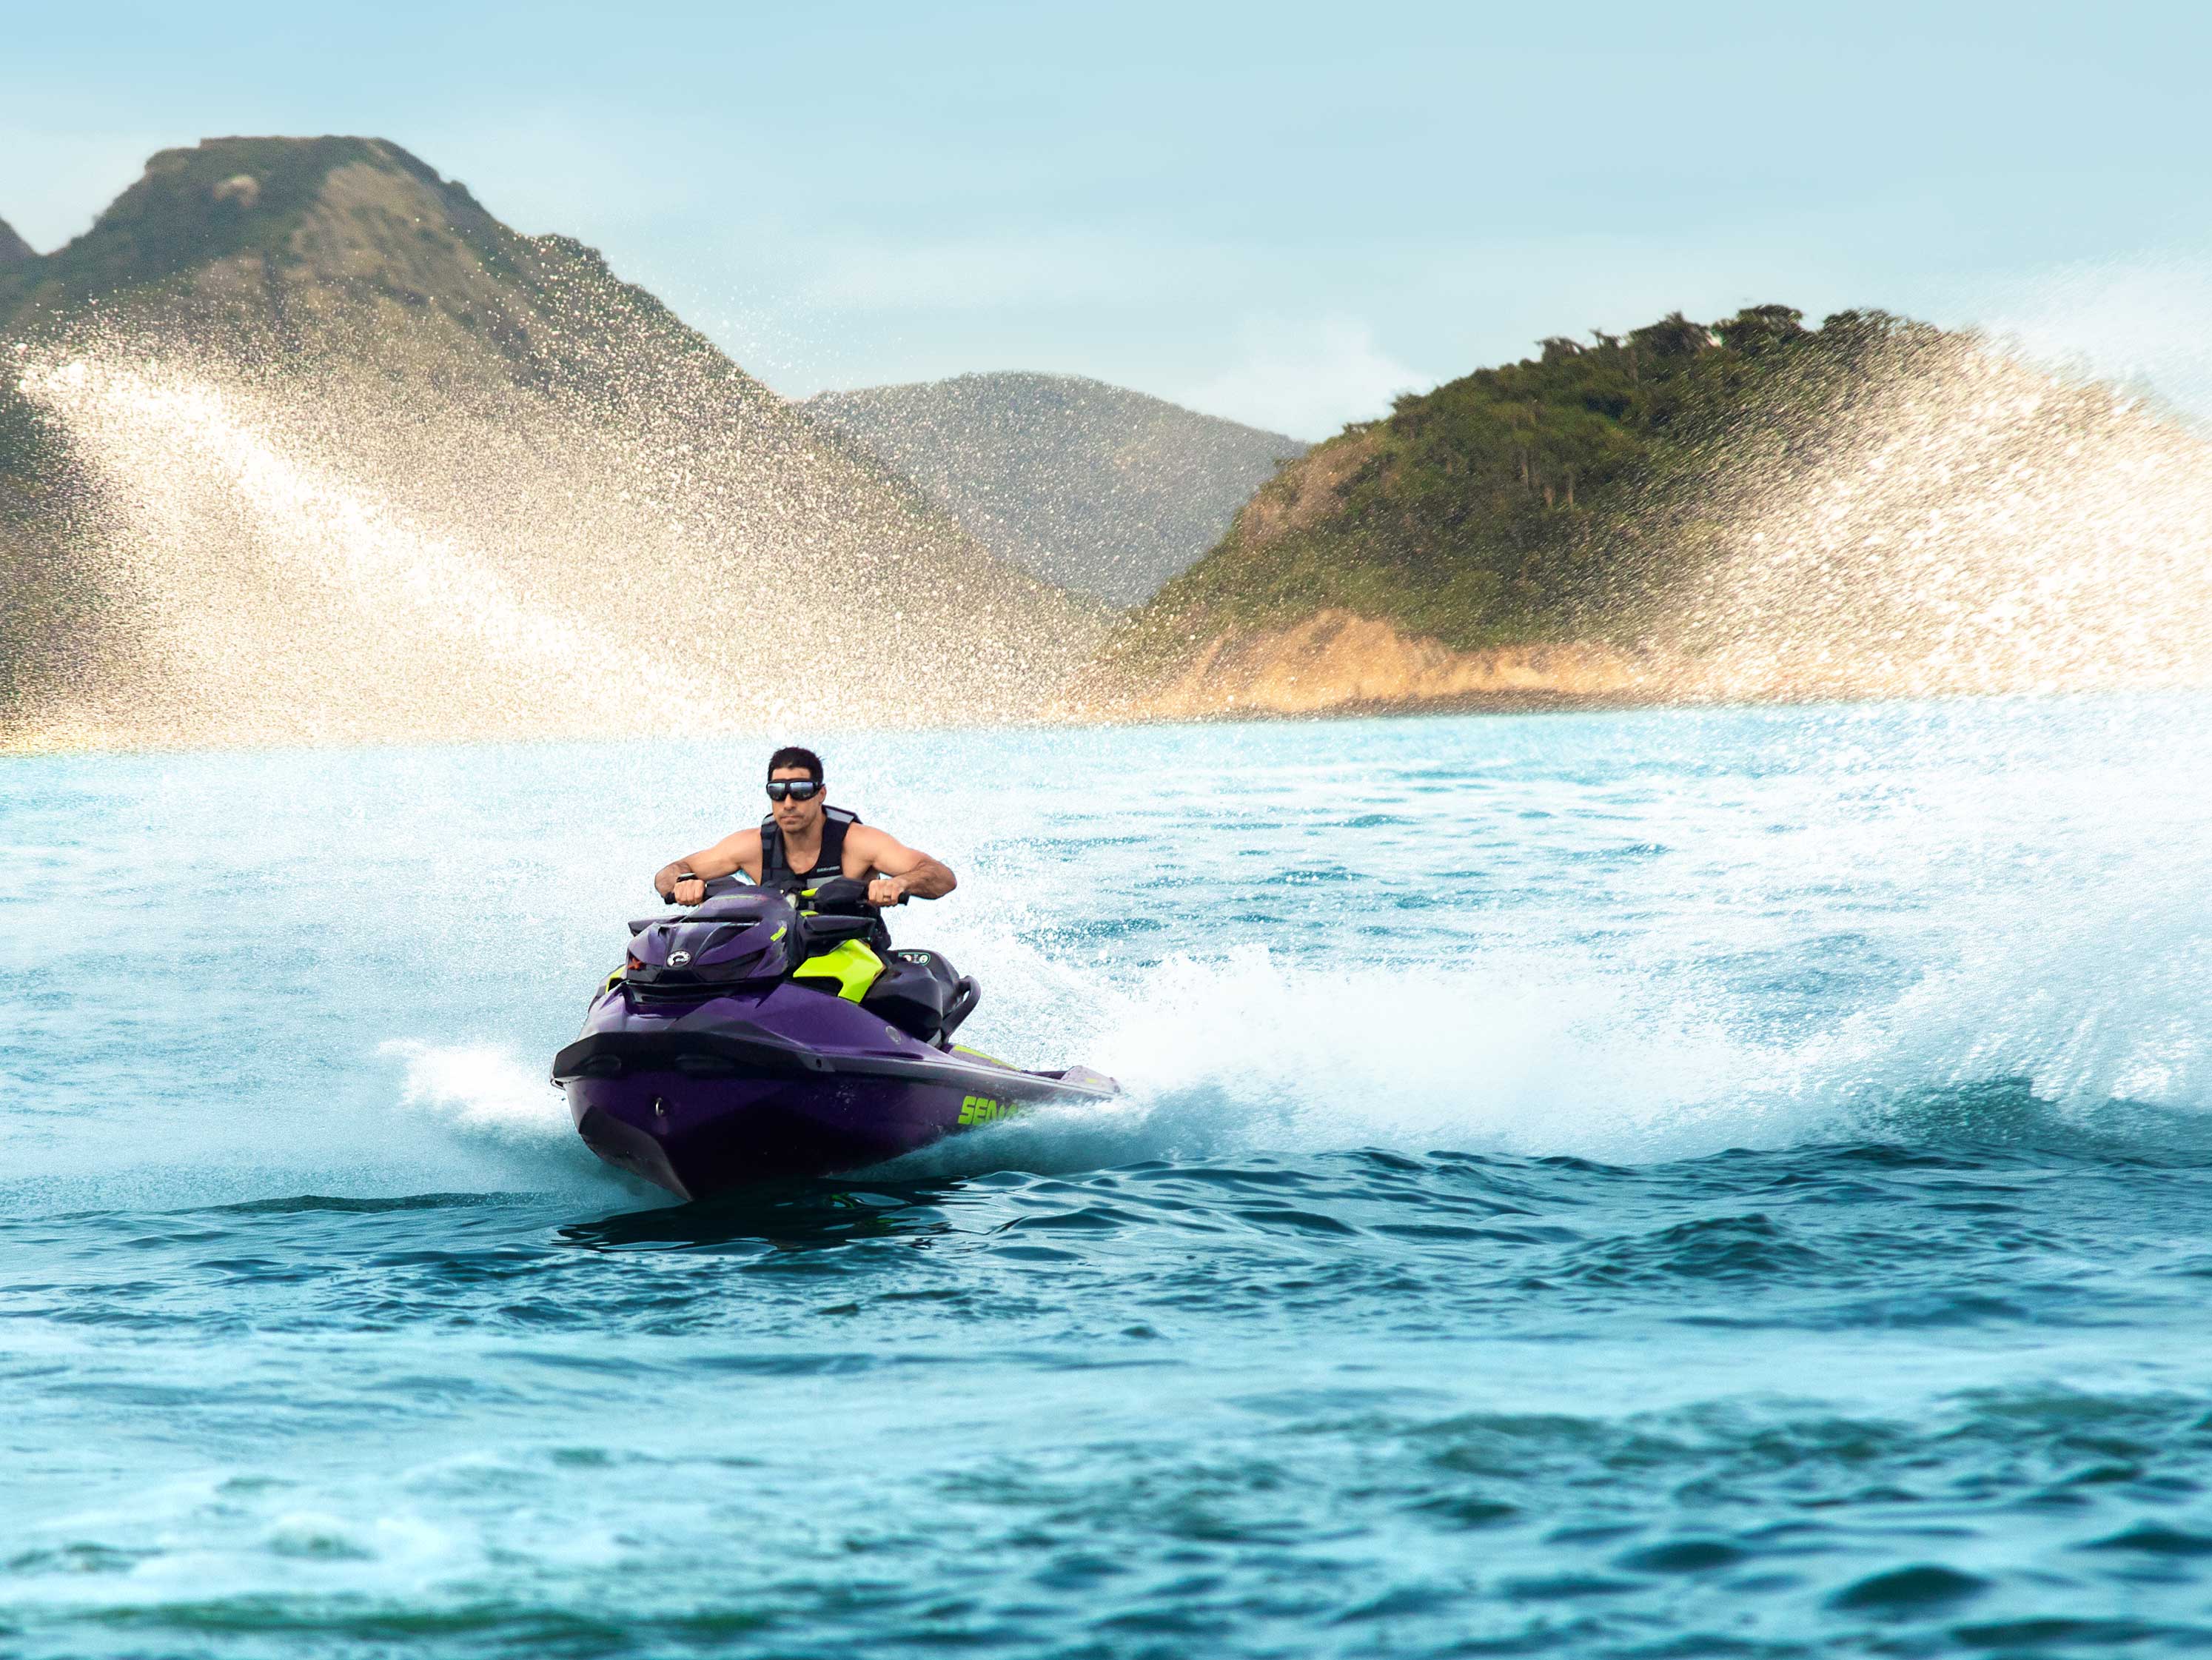 Sea-Doo RXP-X 300 Named to Boating Industry’s 2021 Top Products